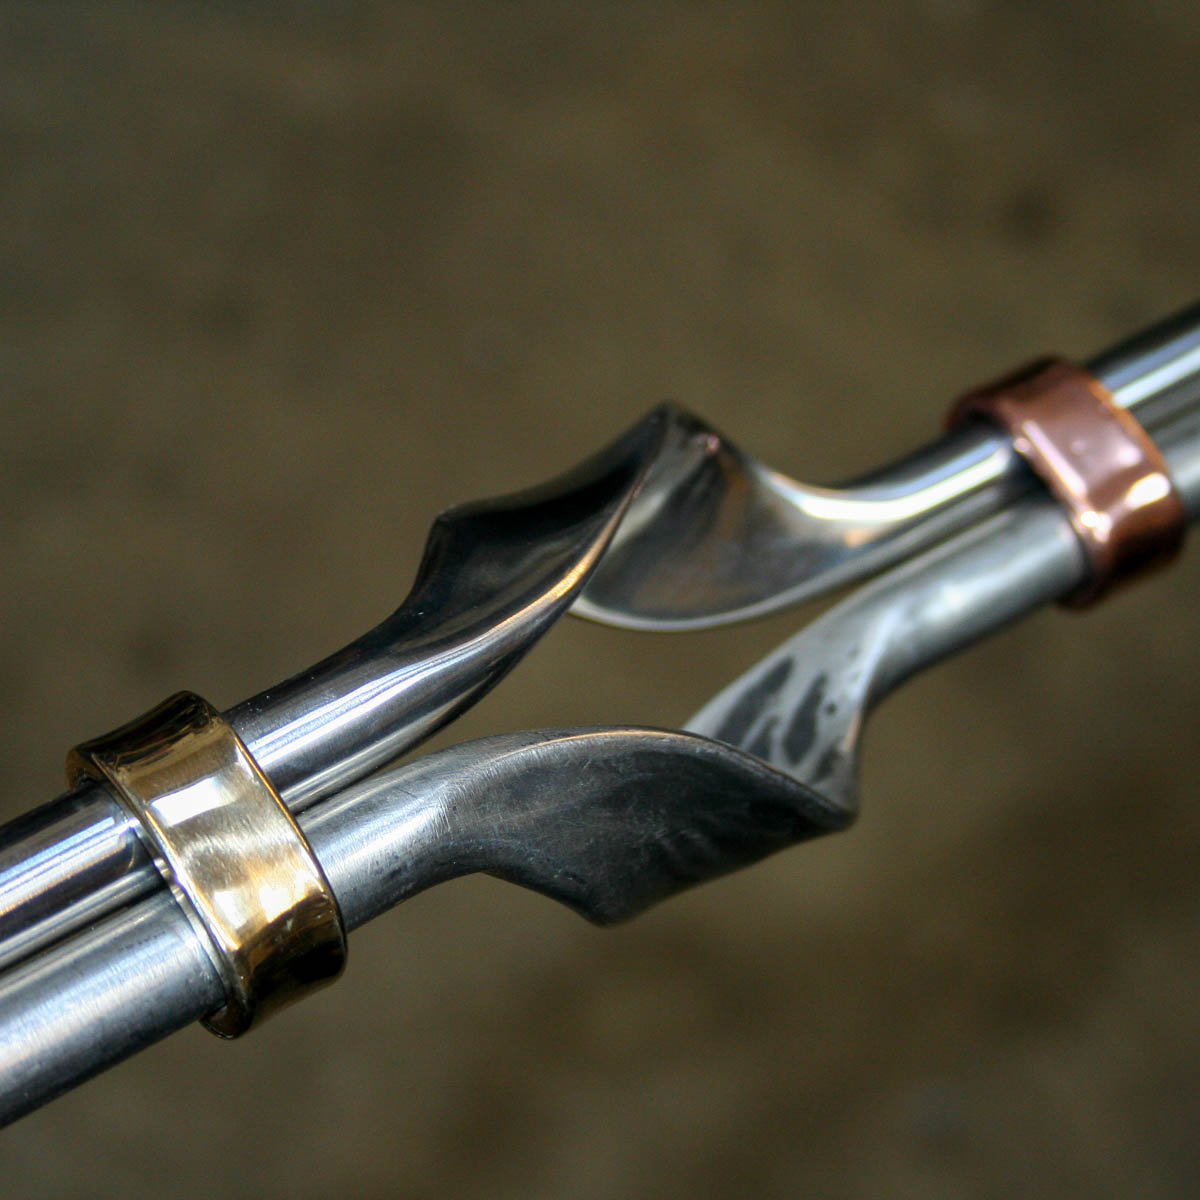 Forged and satin polished stainless steel with copper and bronze detailing